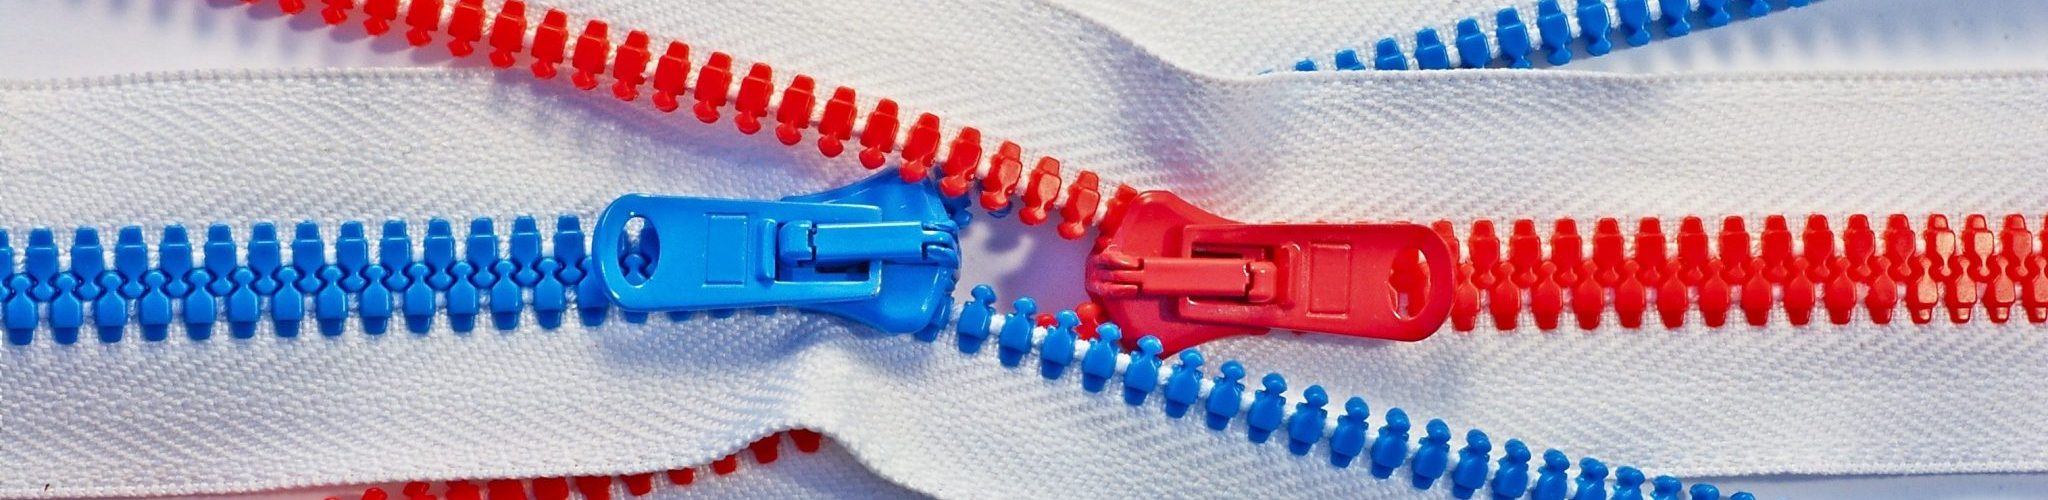 two zippers, one red and one blue, unattached to anything and crossed, zipping into each other